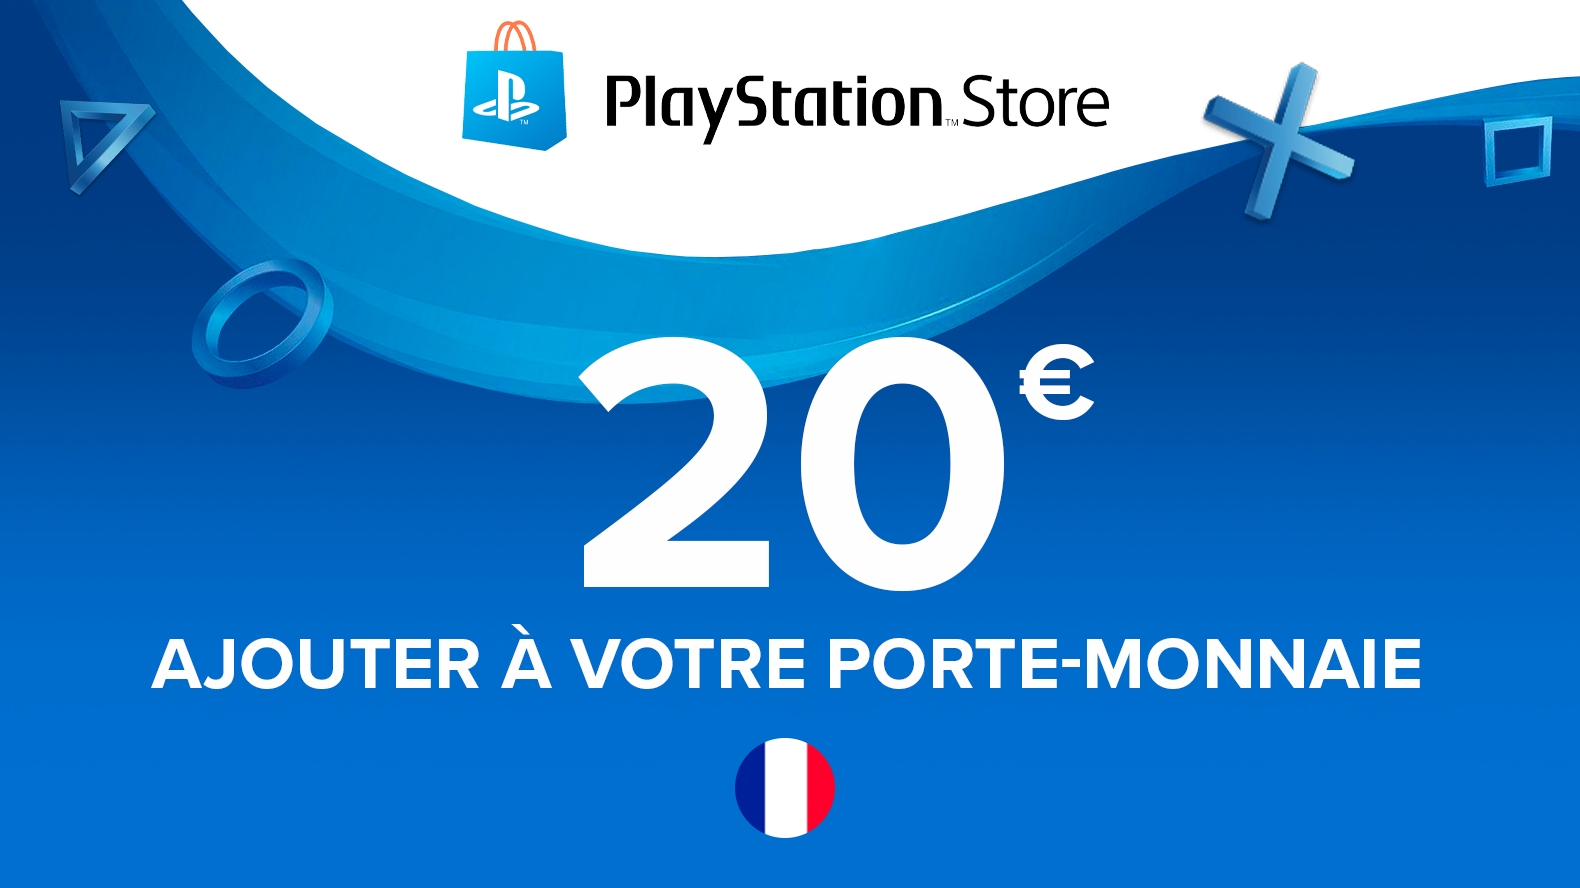 gift playstation now